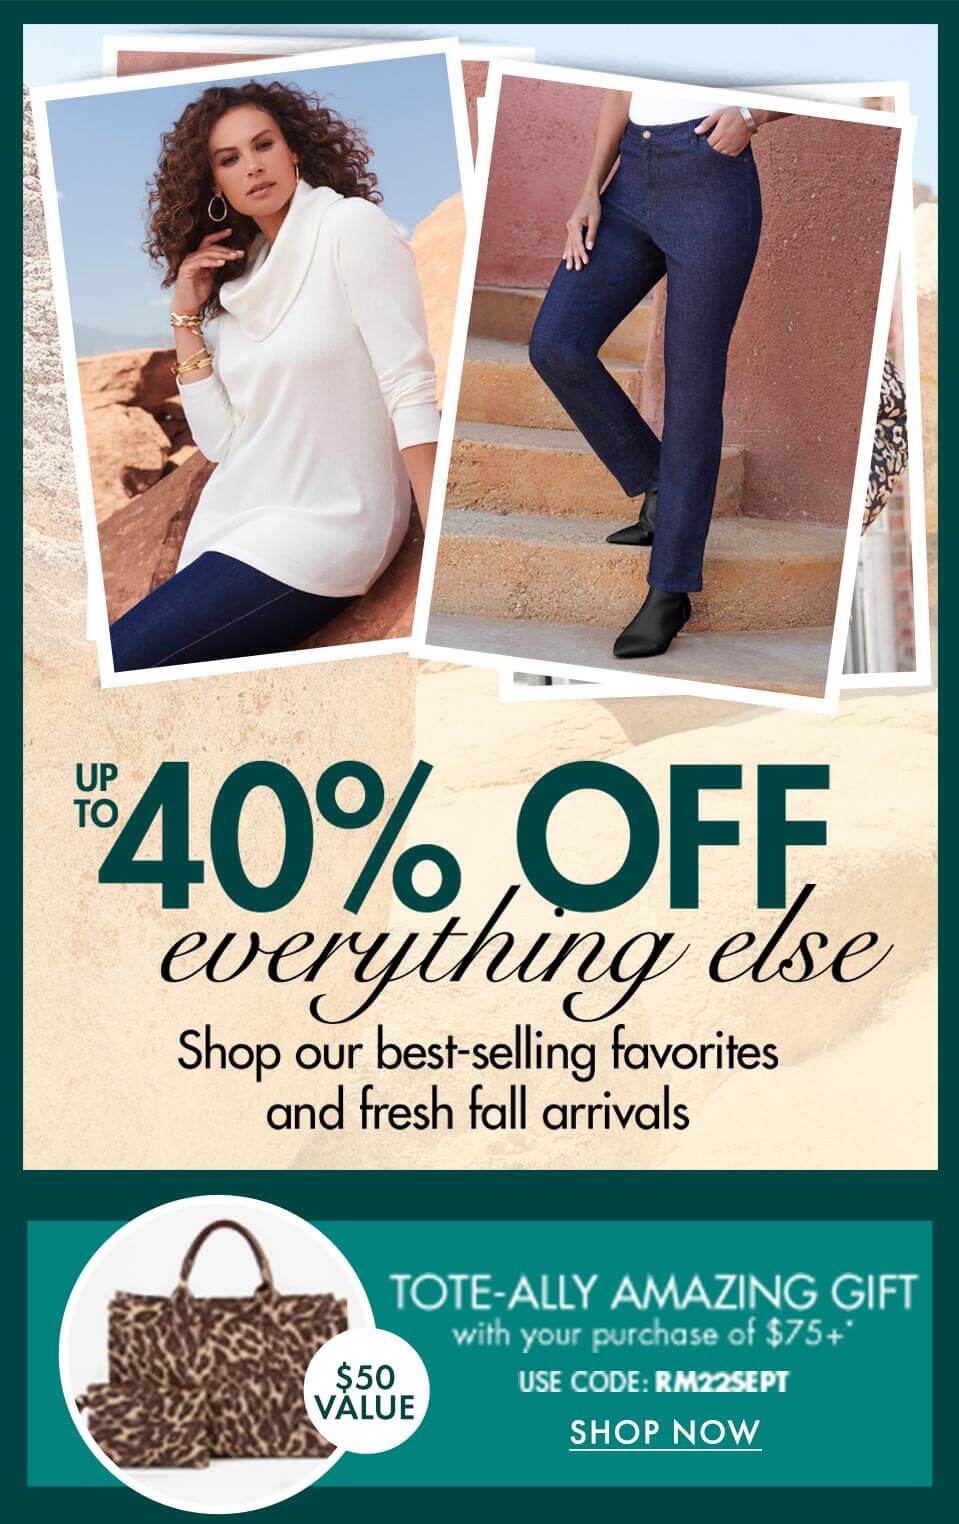 up to 40% off everything else - shop our best selling favorites and fresh fall arrivals. TOTE-ally amazing gift! with your purchase of +75+ USE CODE: R M 2 2 S E P T- SHOP NOW!